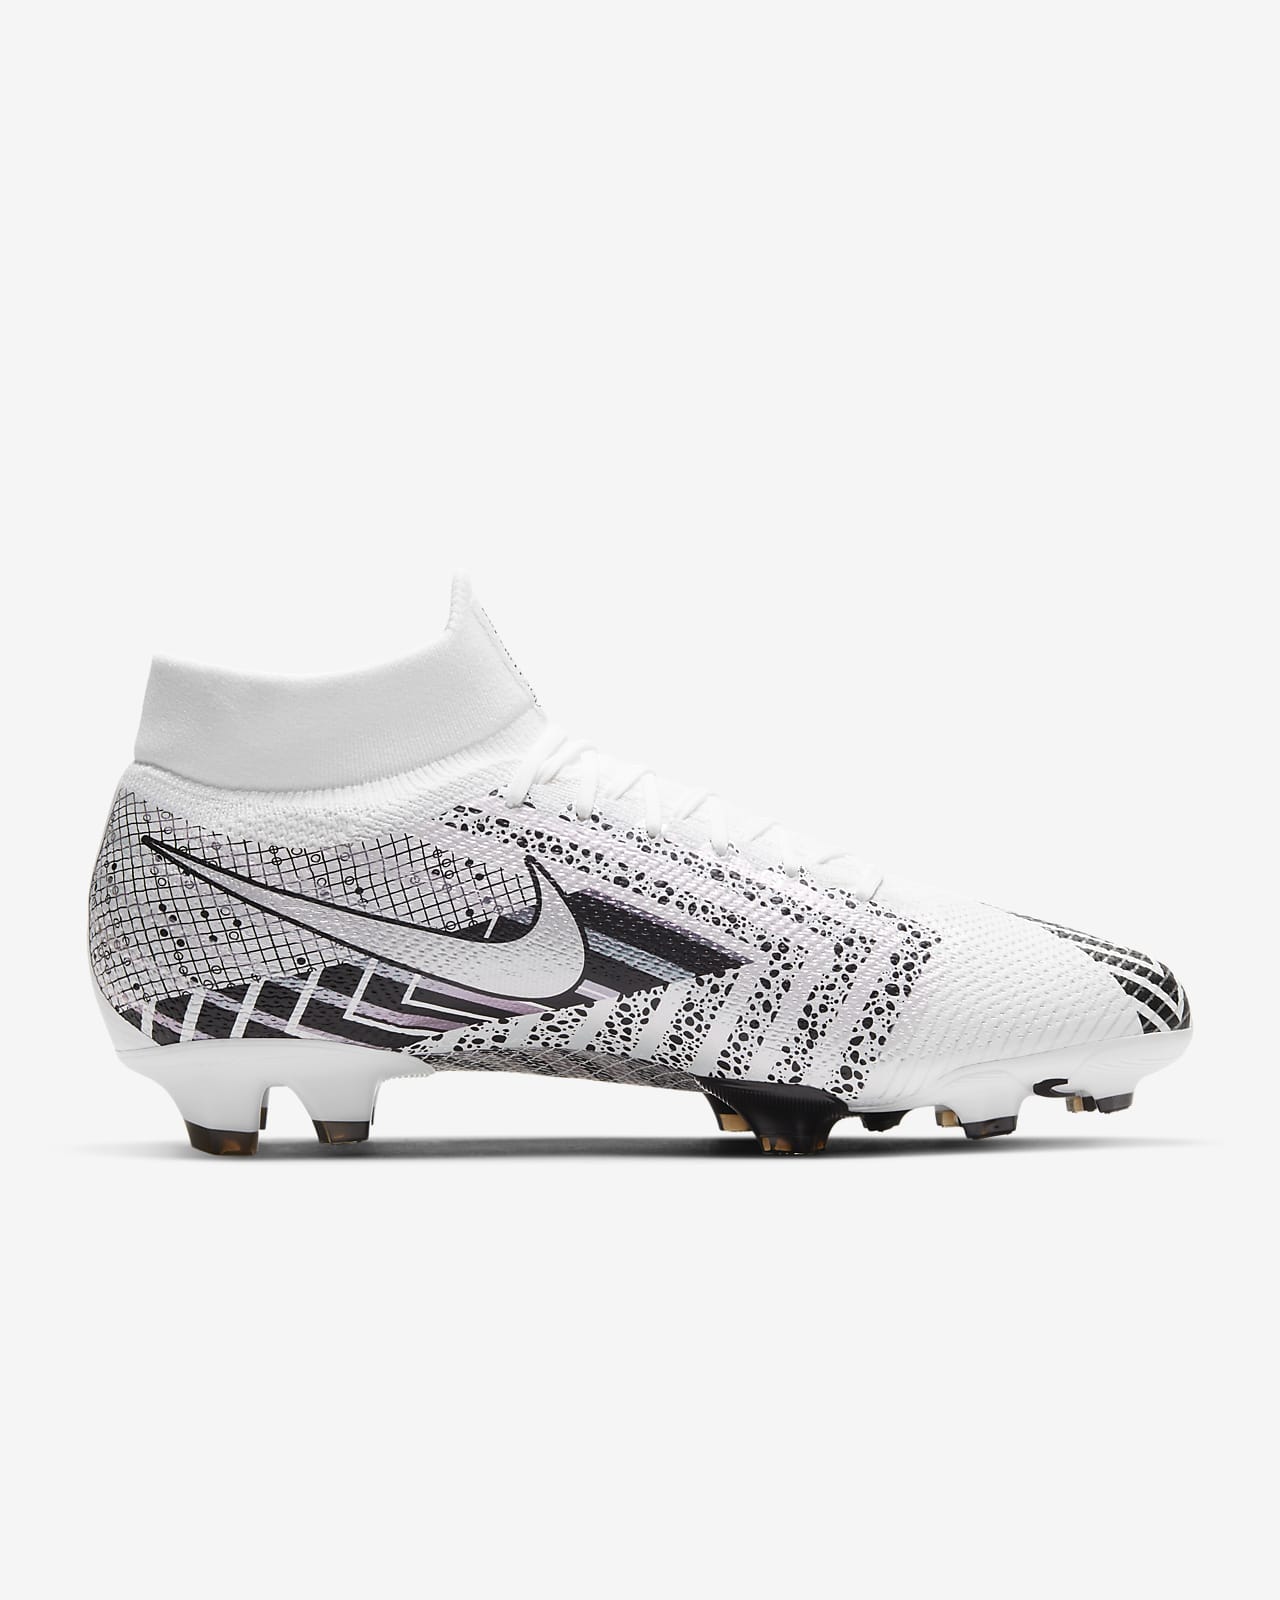 Nike Mercurial Superfly 7 Pro MDS FG 